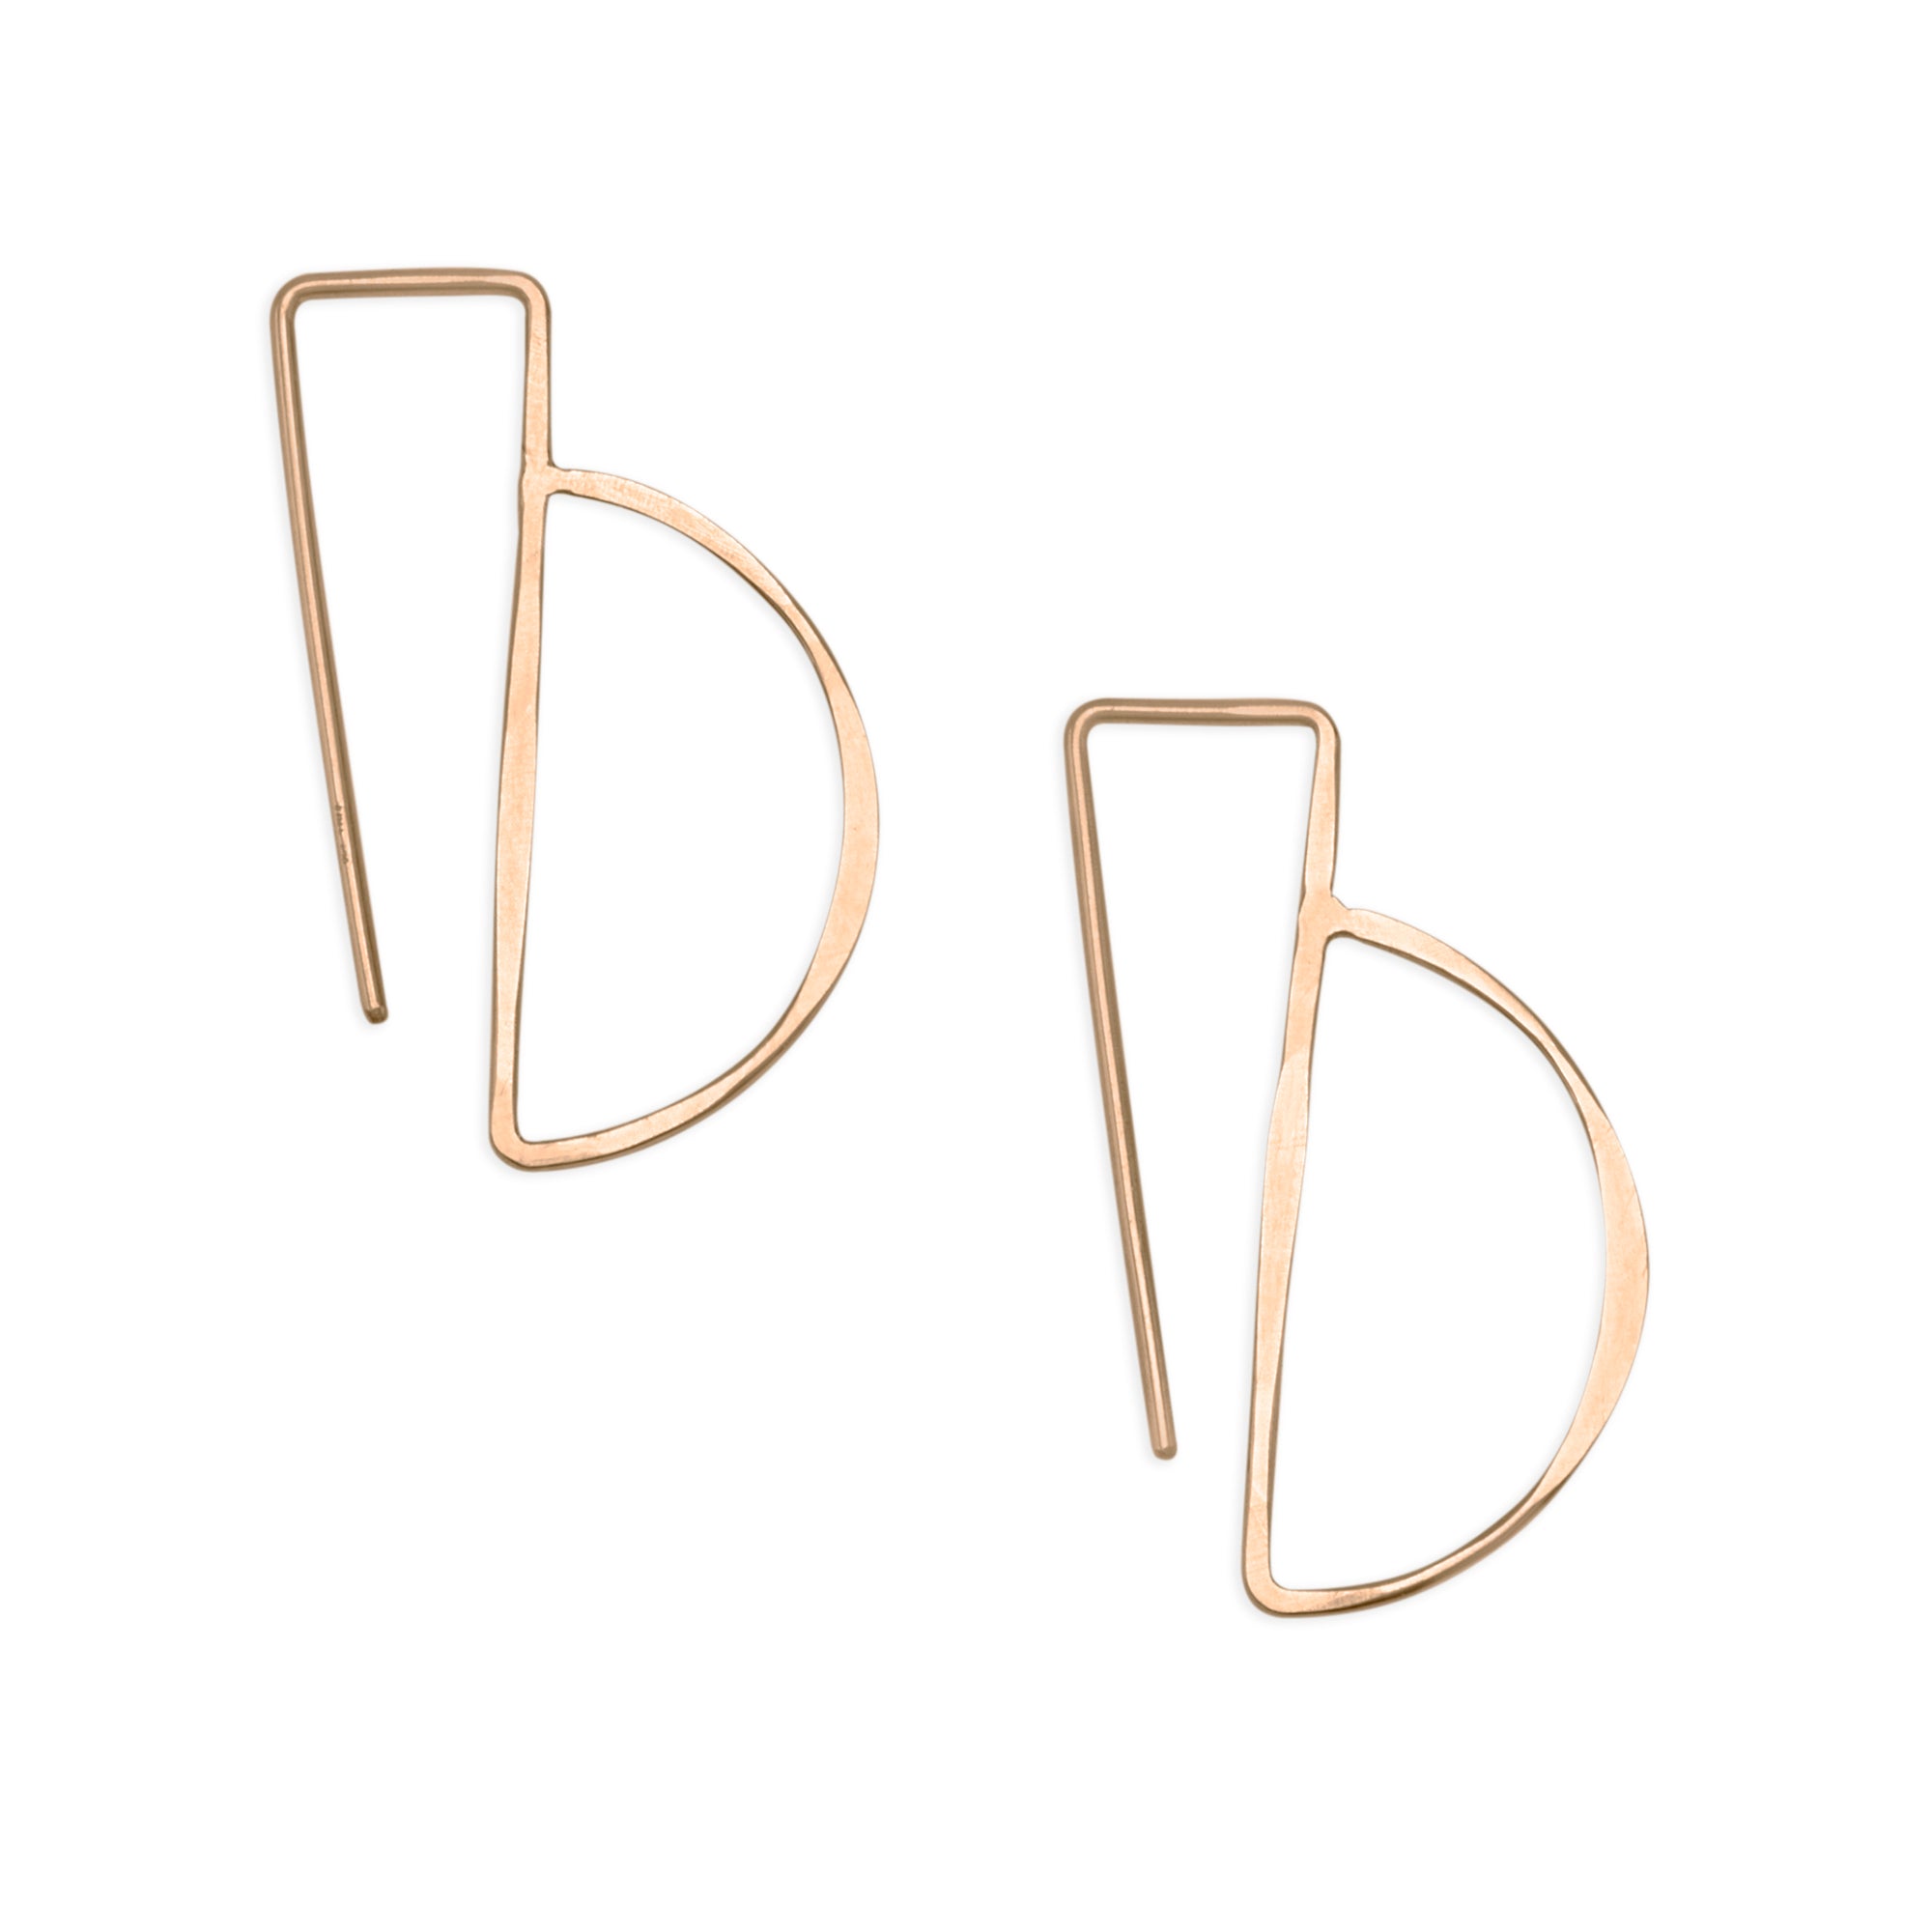 The Partition Hooks in 14k gold are chic threader earrings featuring a hand hammered semicircle shape